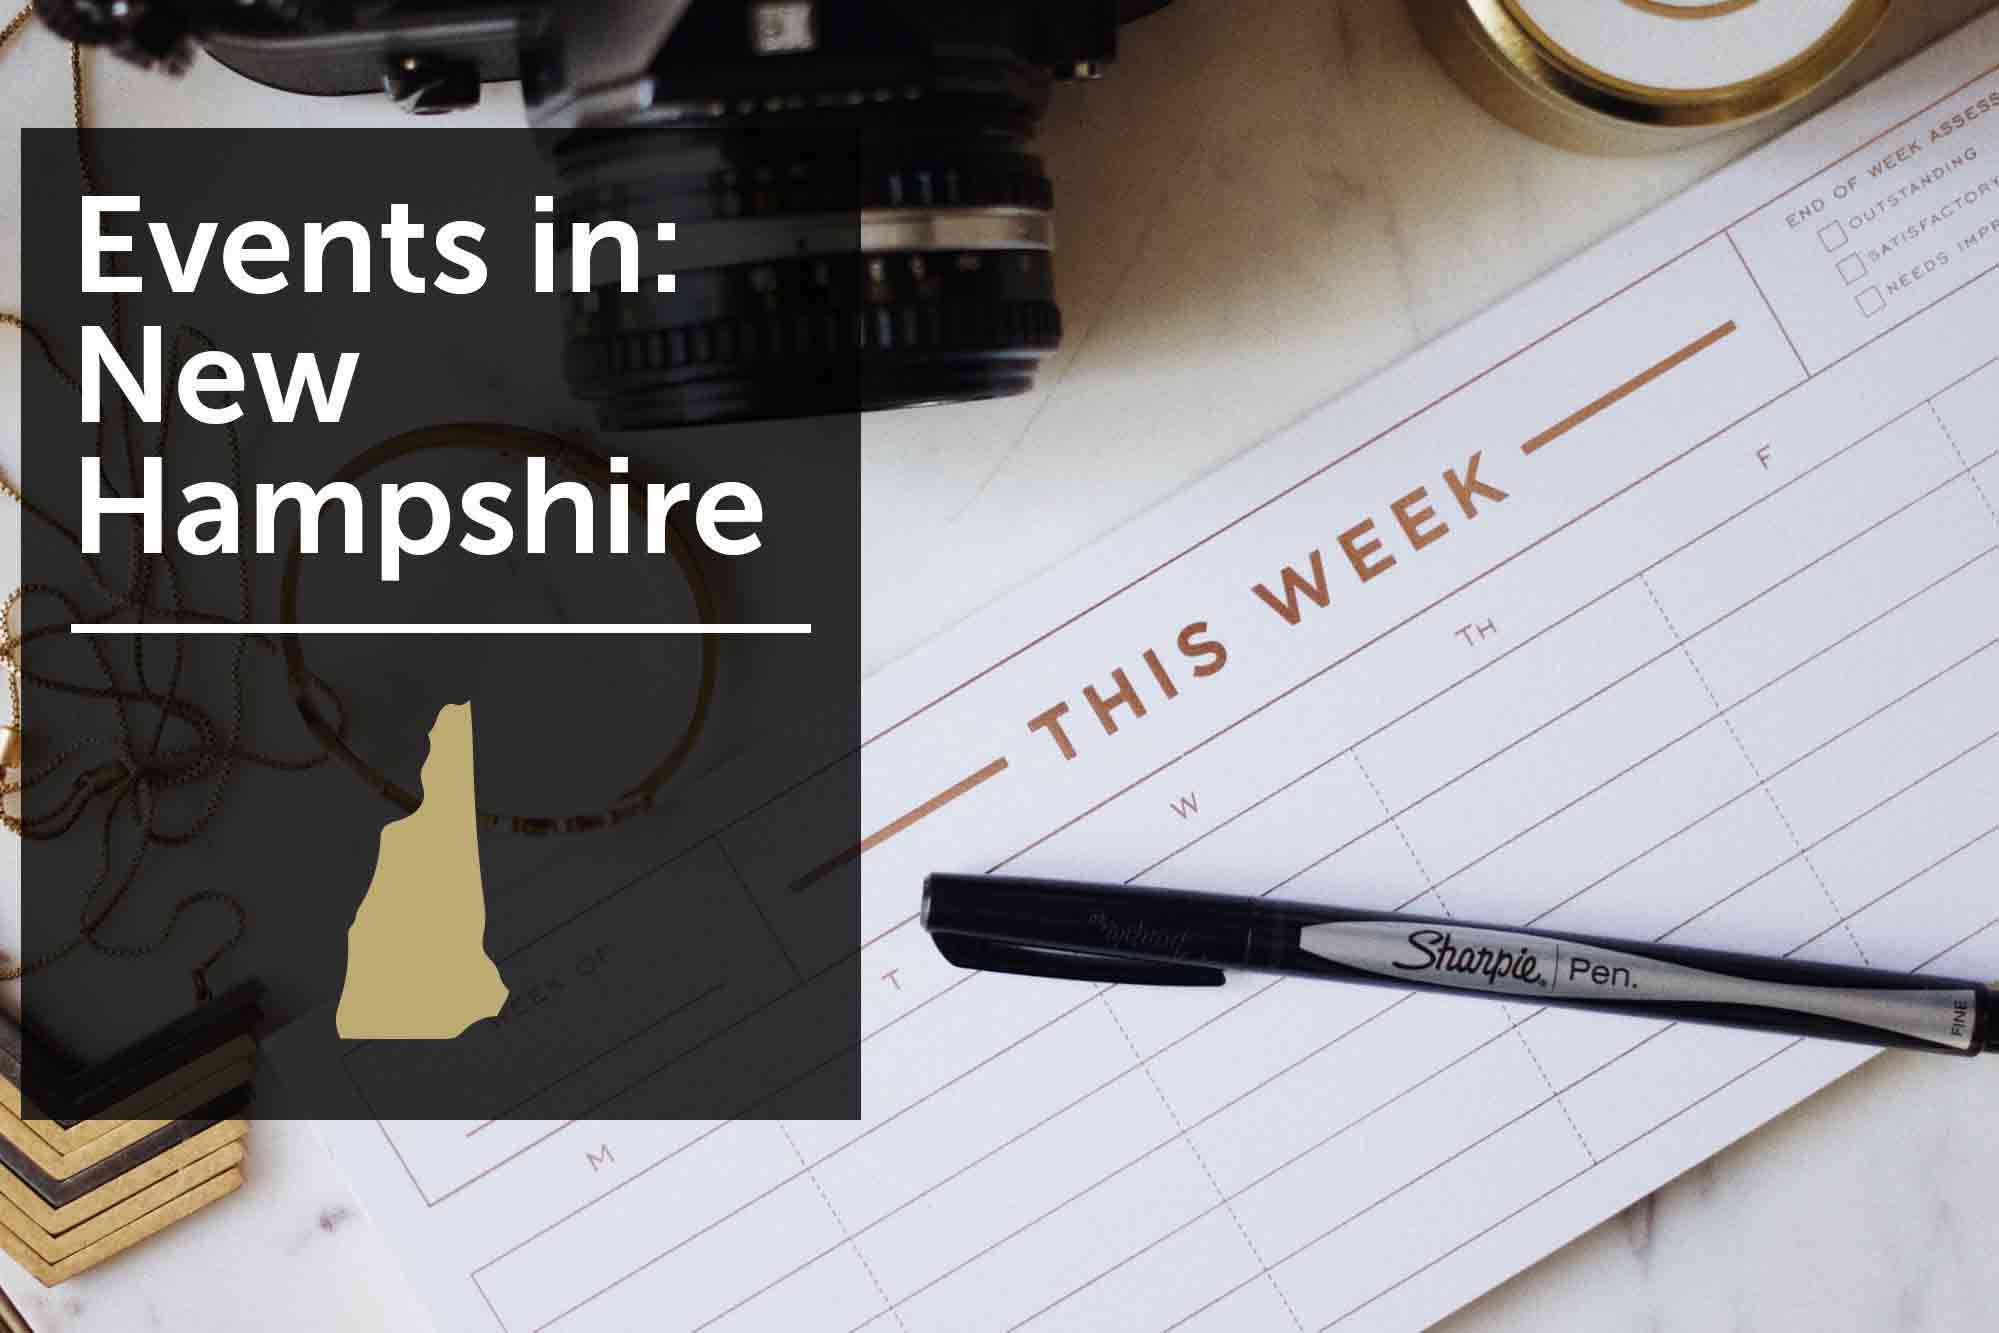 Women's business events in New Hampshire